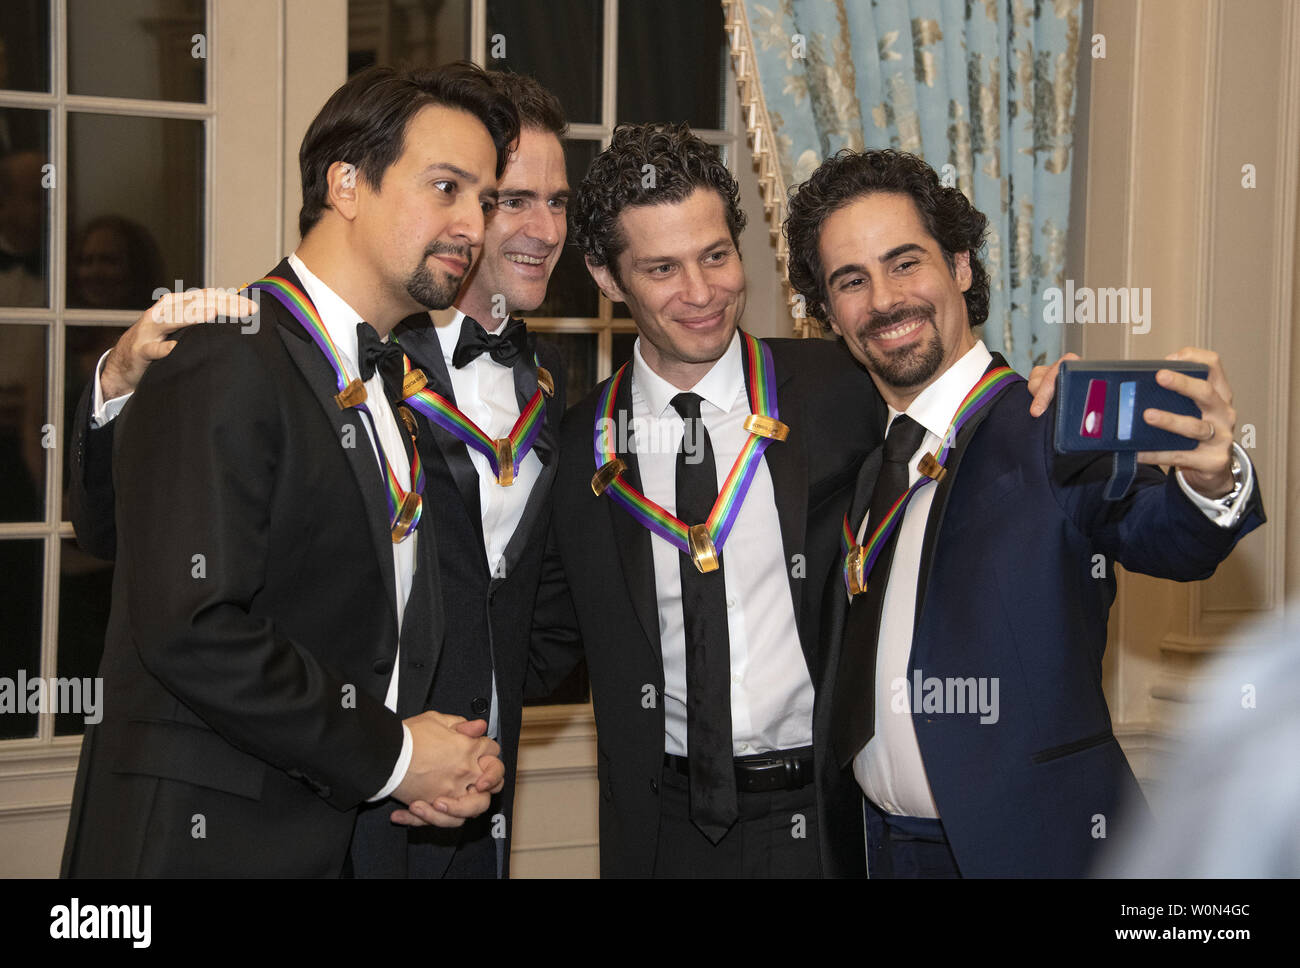 Hamilton co-creators Lin-manuel Miranda, Andy Blankenbuehler, Thomas Kail, and Alex Lacamoire, four of the recipients of the 41st Annual Kennedy Center Honors, pose for a selfie prior to sitting for a group photo following a dinner hosted by United States Deputy Secretary of State John J. Sullivan in their honor at the US Department of State in Washington, D.C. on Saturday, December 1, 2018.  The 2018 honorees are: singer and actress Cher; composer and pianist Philip Glass; Country music entertainer Reba McEntire; and jazz saxophonist and composer Wayne Shorter. This year, the co-creators of H Stock Photo